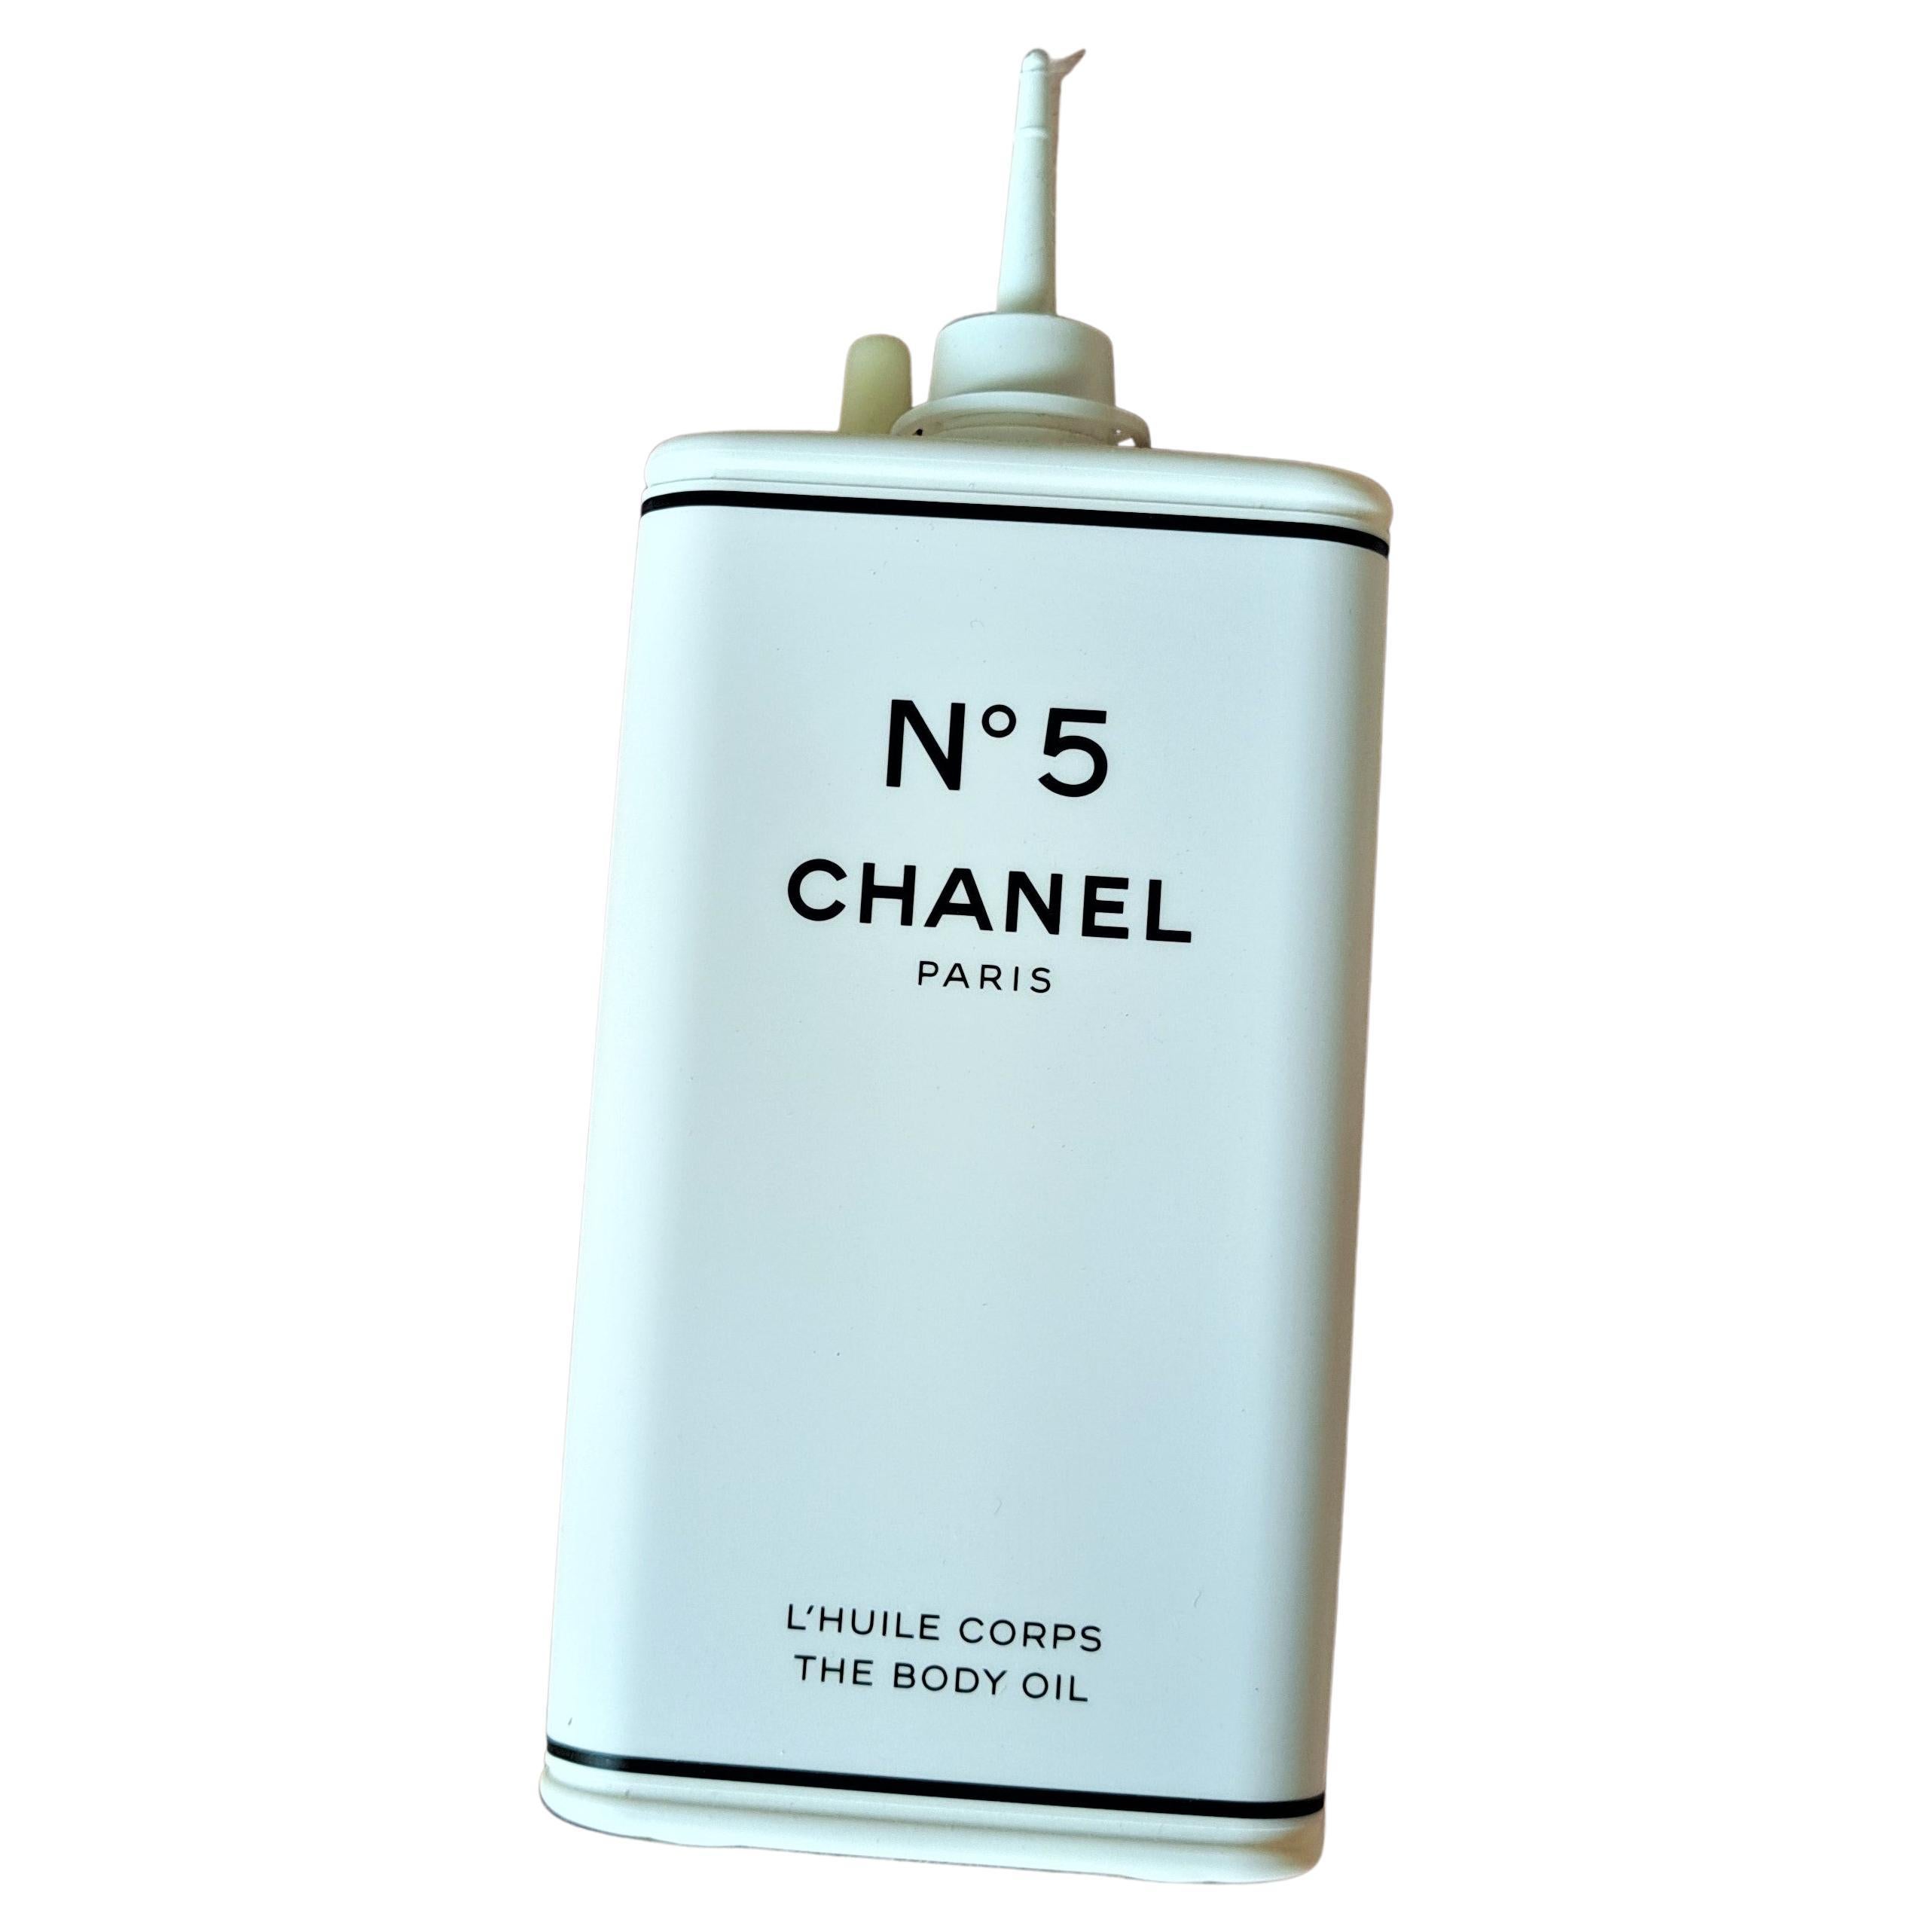 Chanel N°5 Factory Collection Limited Edition The Body Oil & Hair New im Angebot